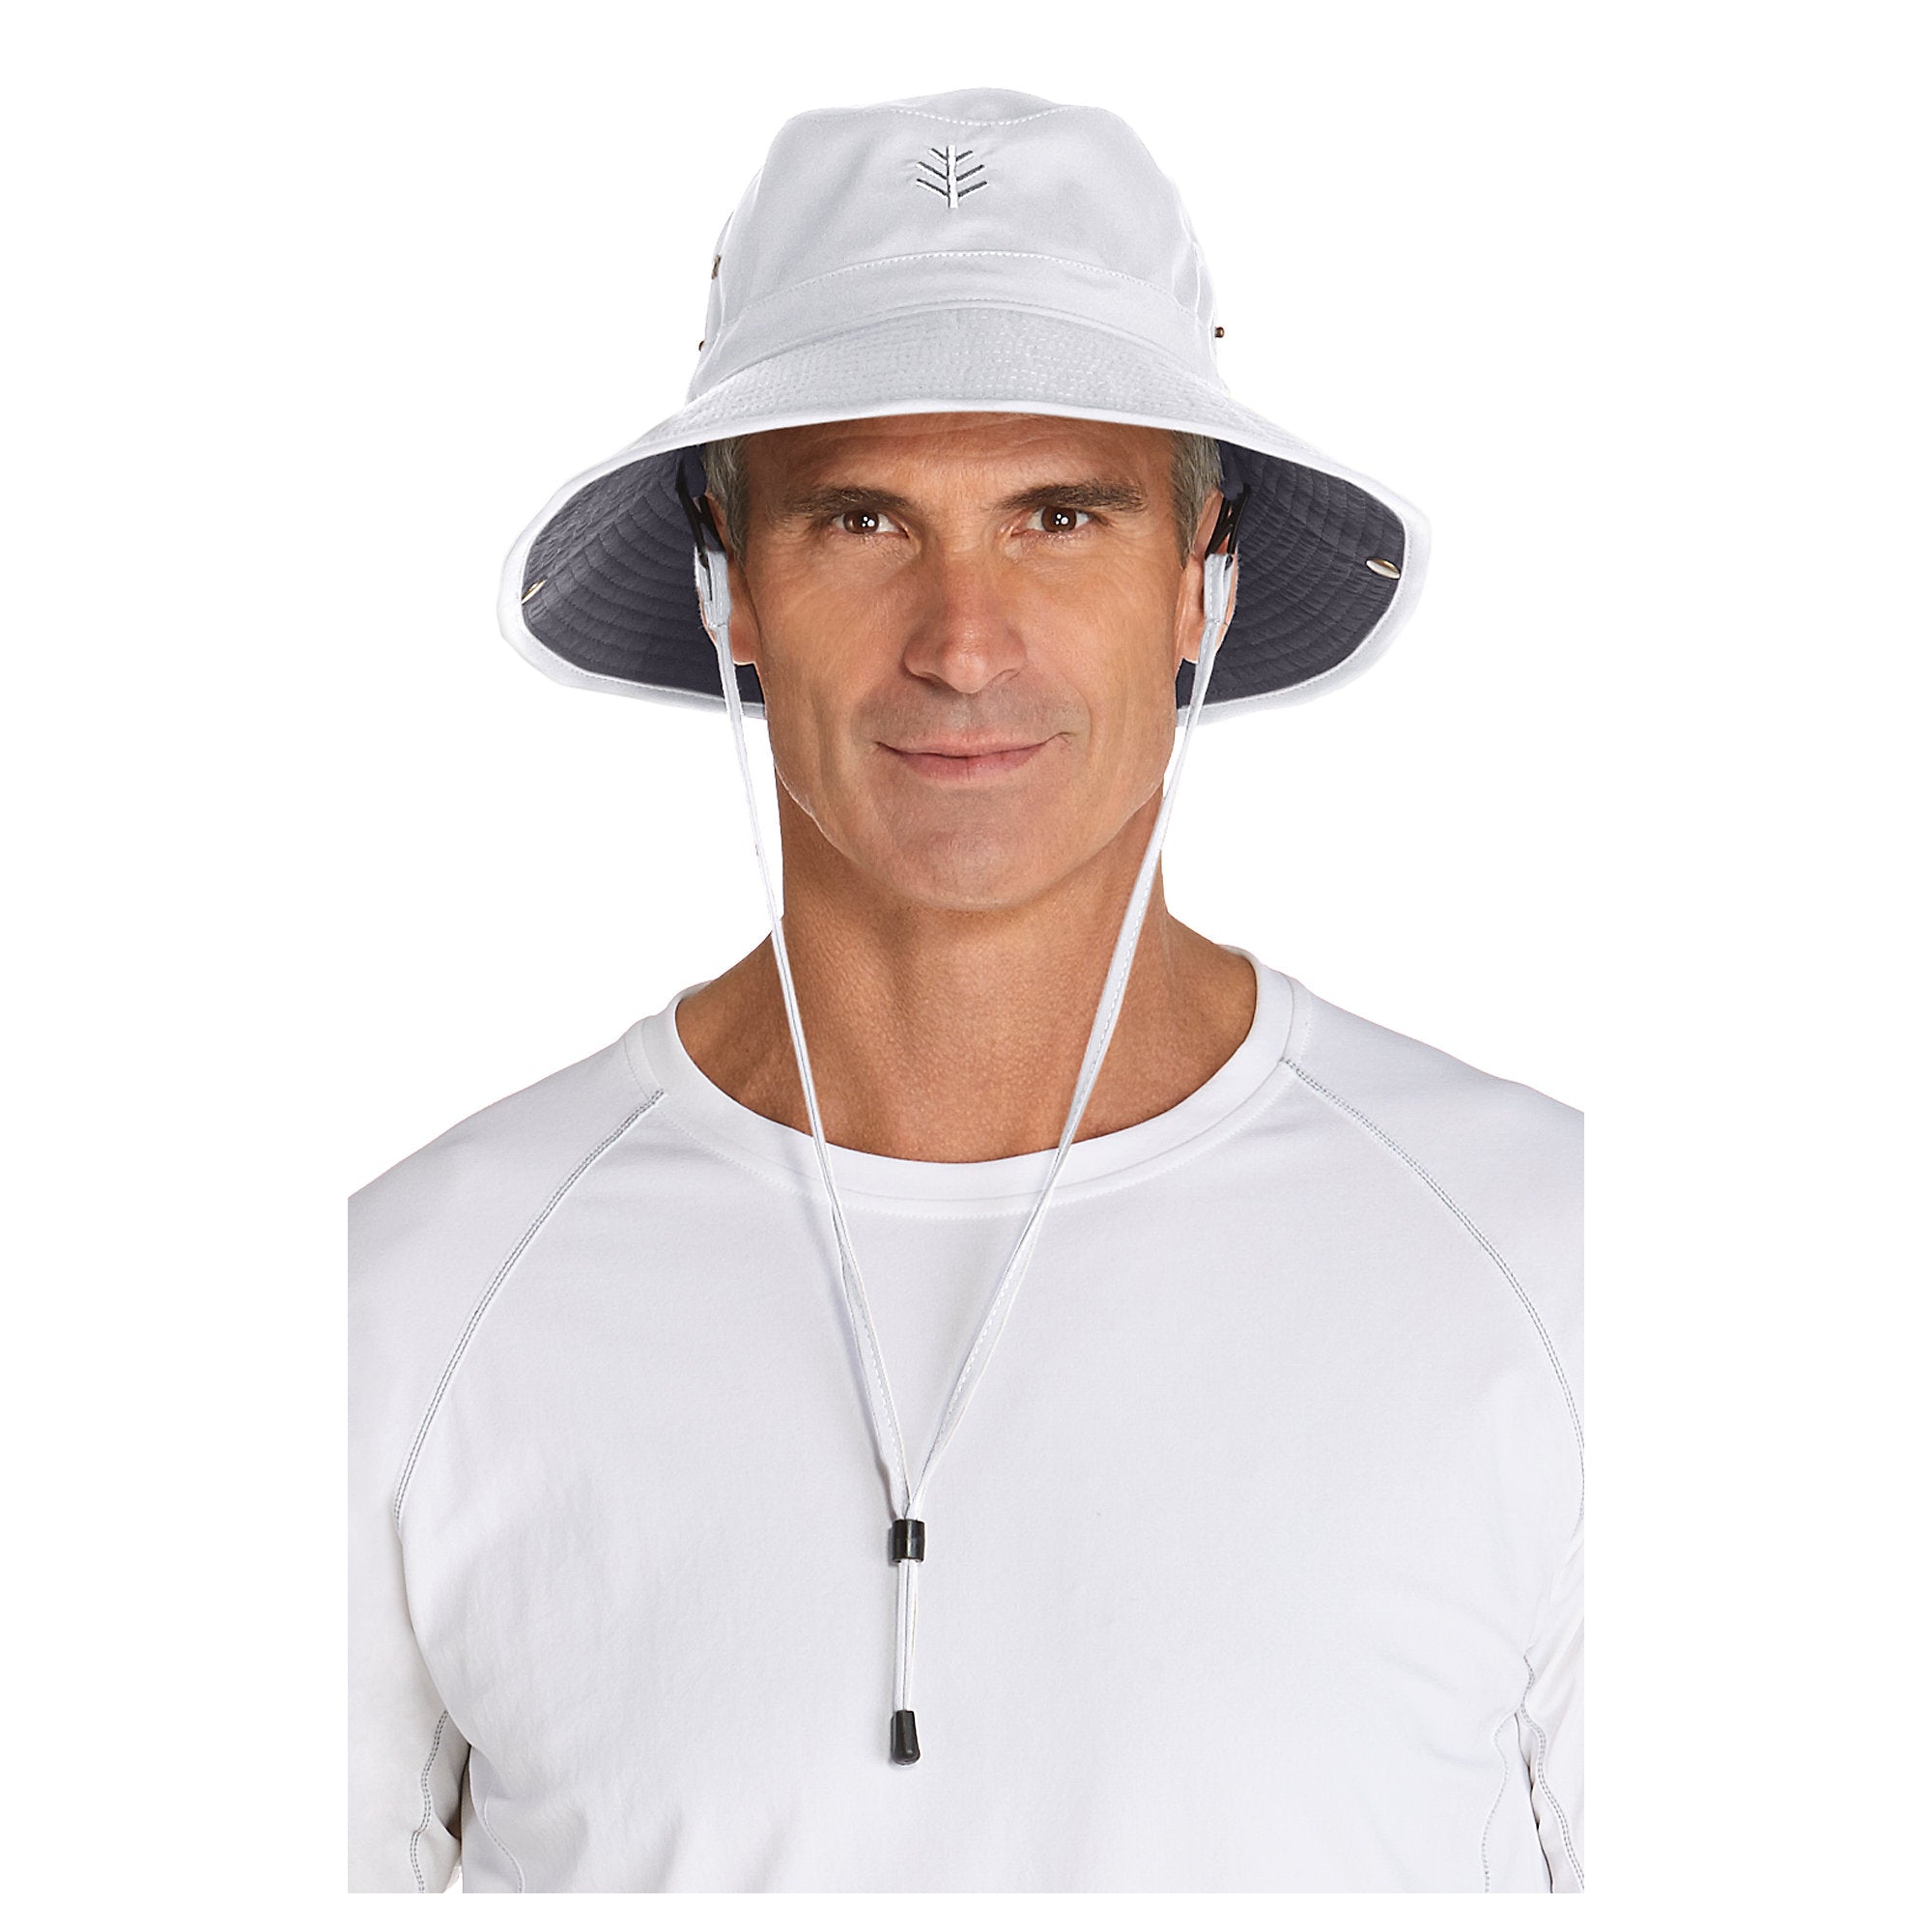 Men's Chase Featherweight Bucket Hat UPF 50+ XL/L (RP) - Molly's! A Chic and Unique Boutique 